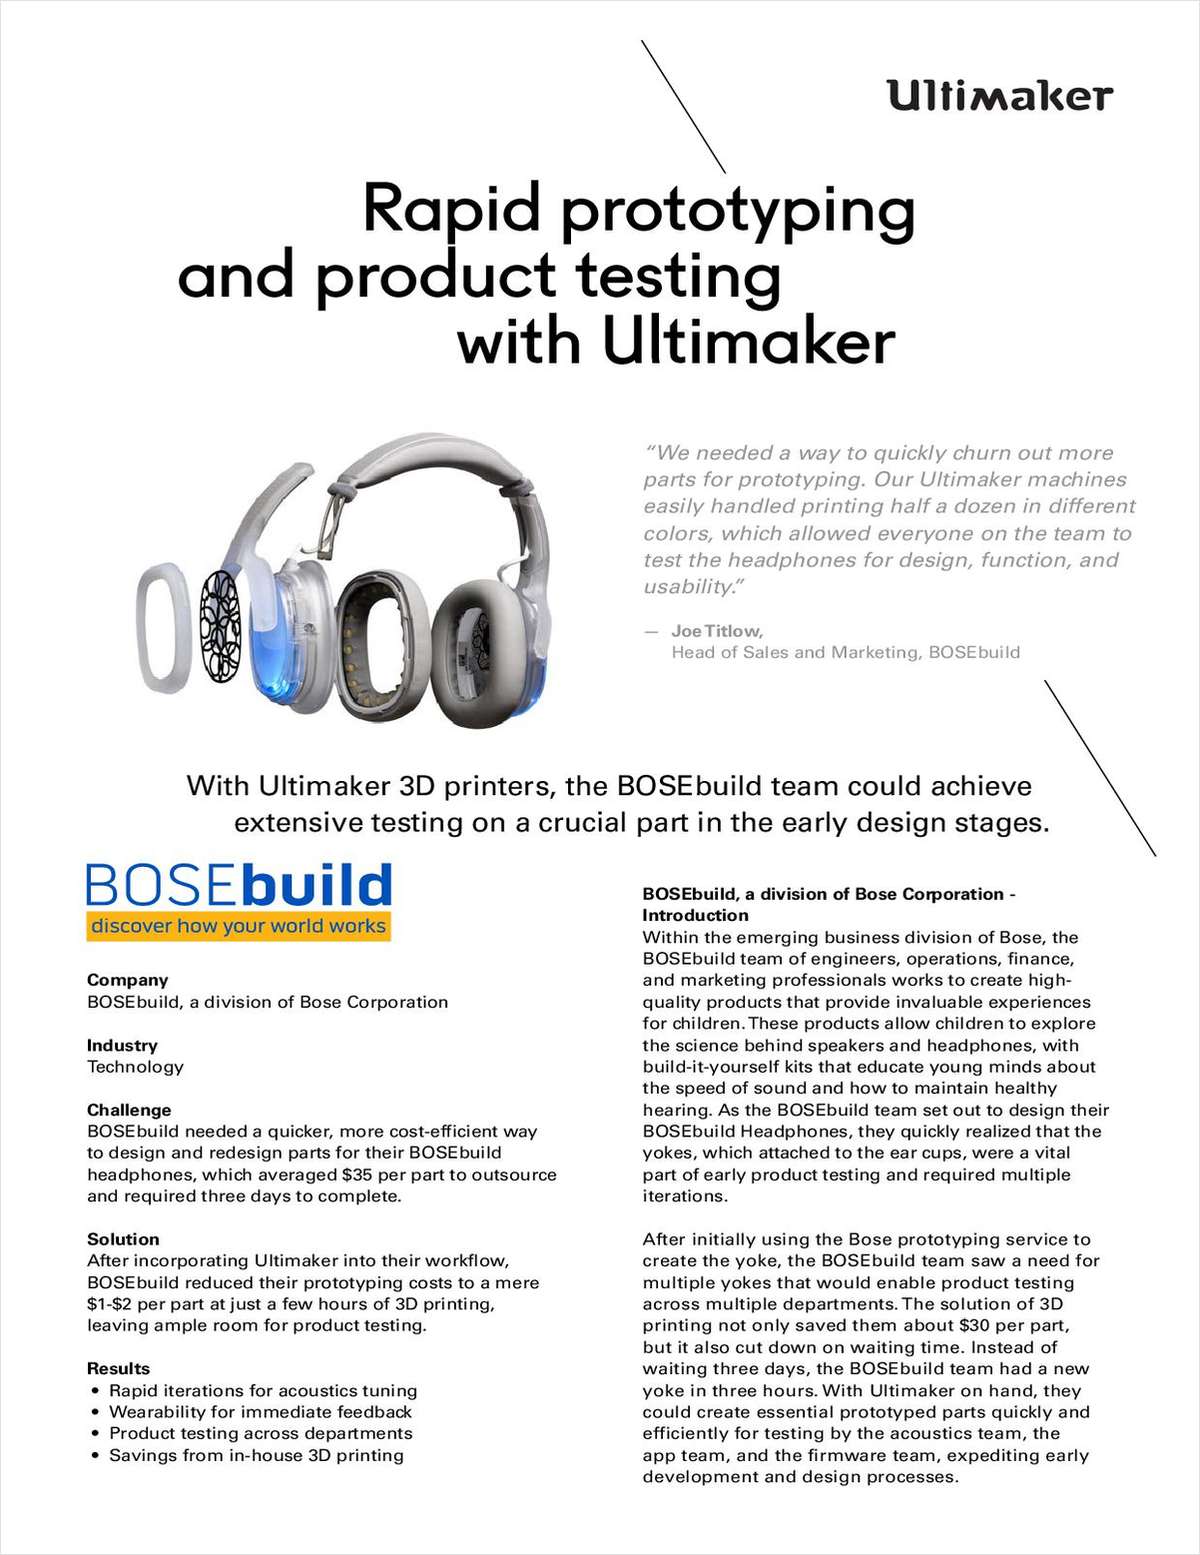 Rapid prototyping and product testing with Ultimaker